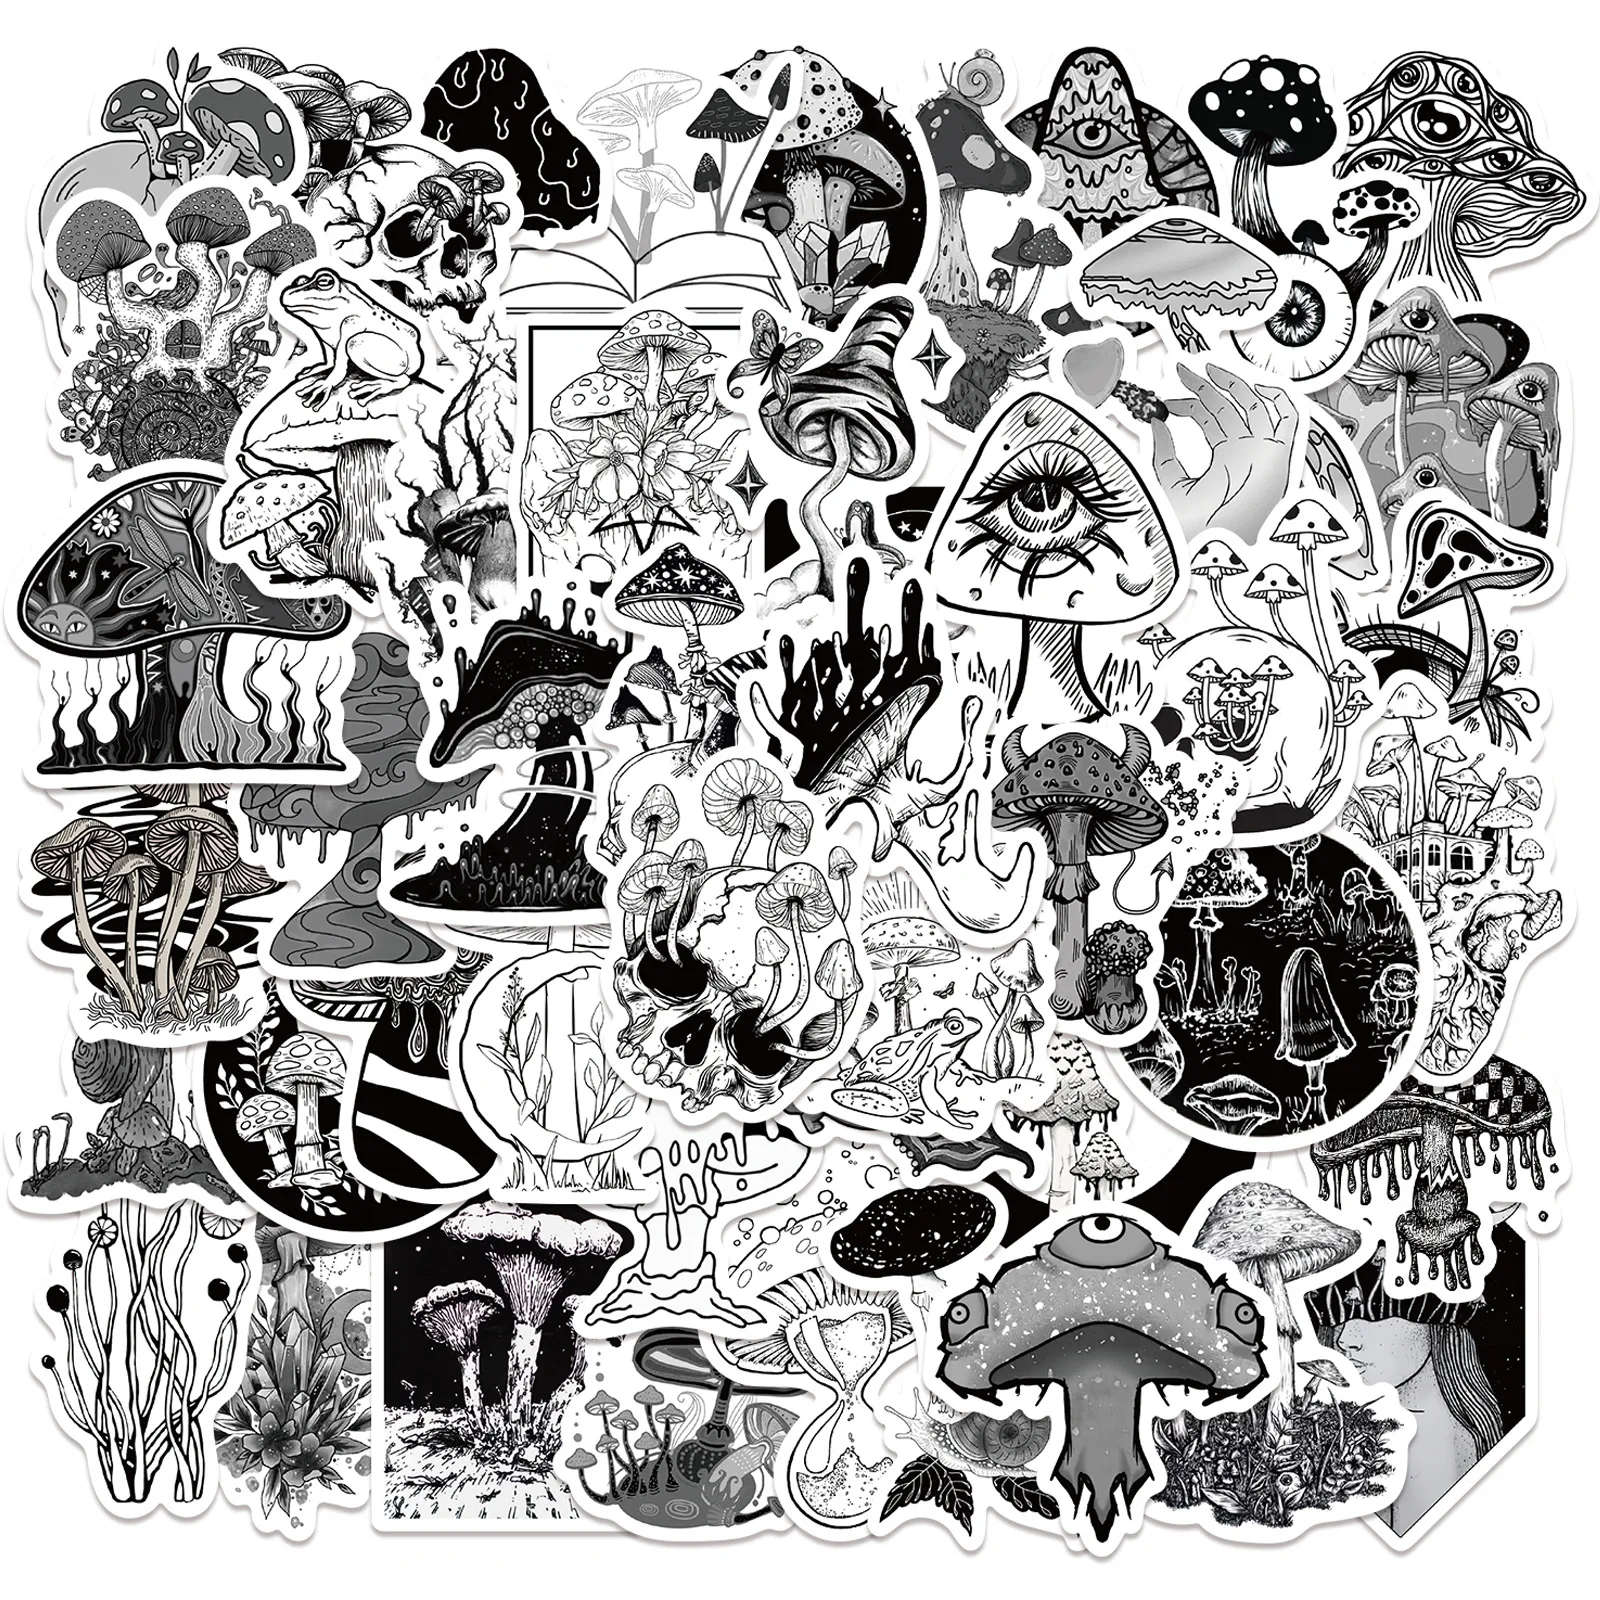 50Pcs Black and White Gothic Mushroom Stickers for Phone Laptop Luggage Notebook Car Scrapbooking Waterproof Decals Kids Toy C3